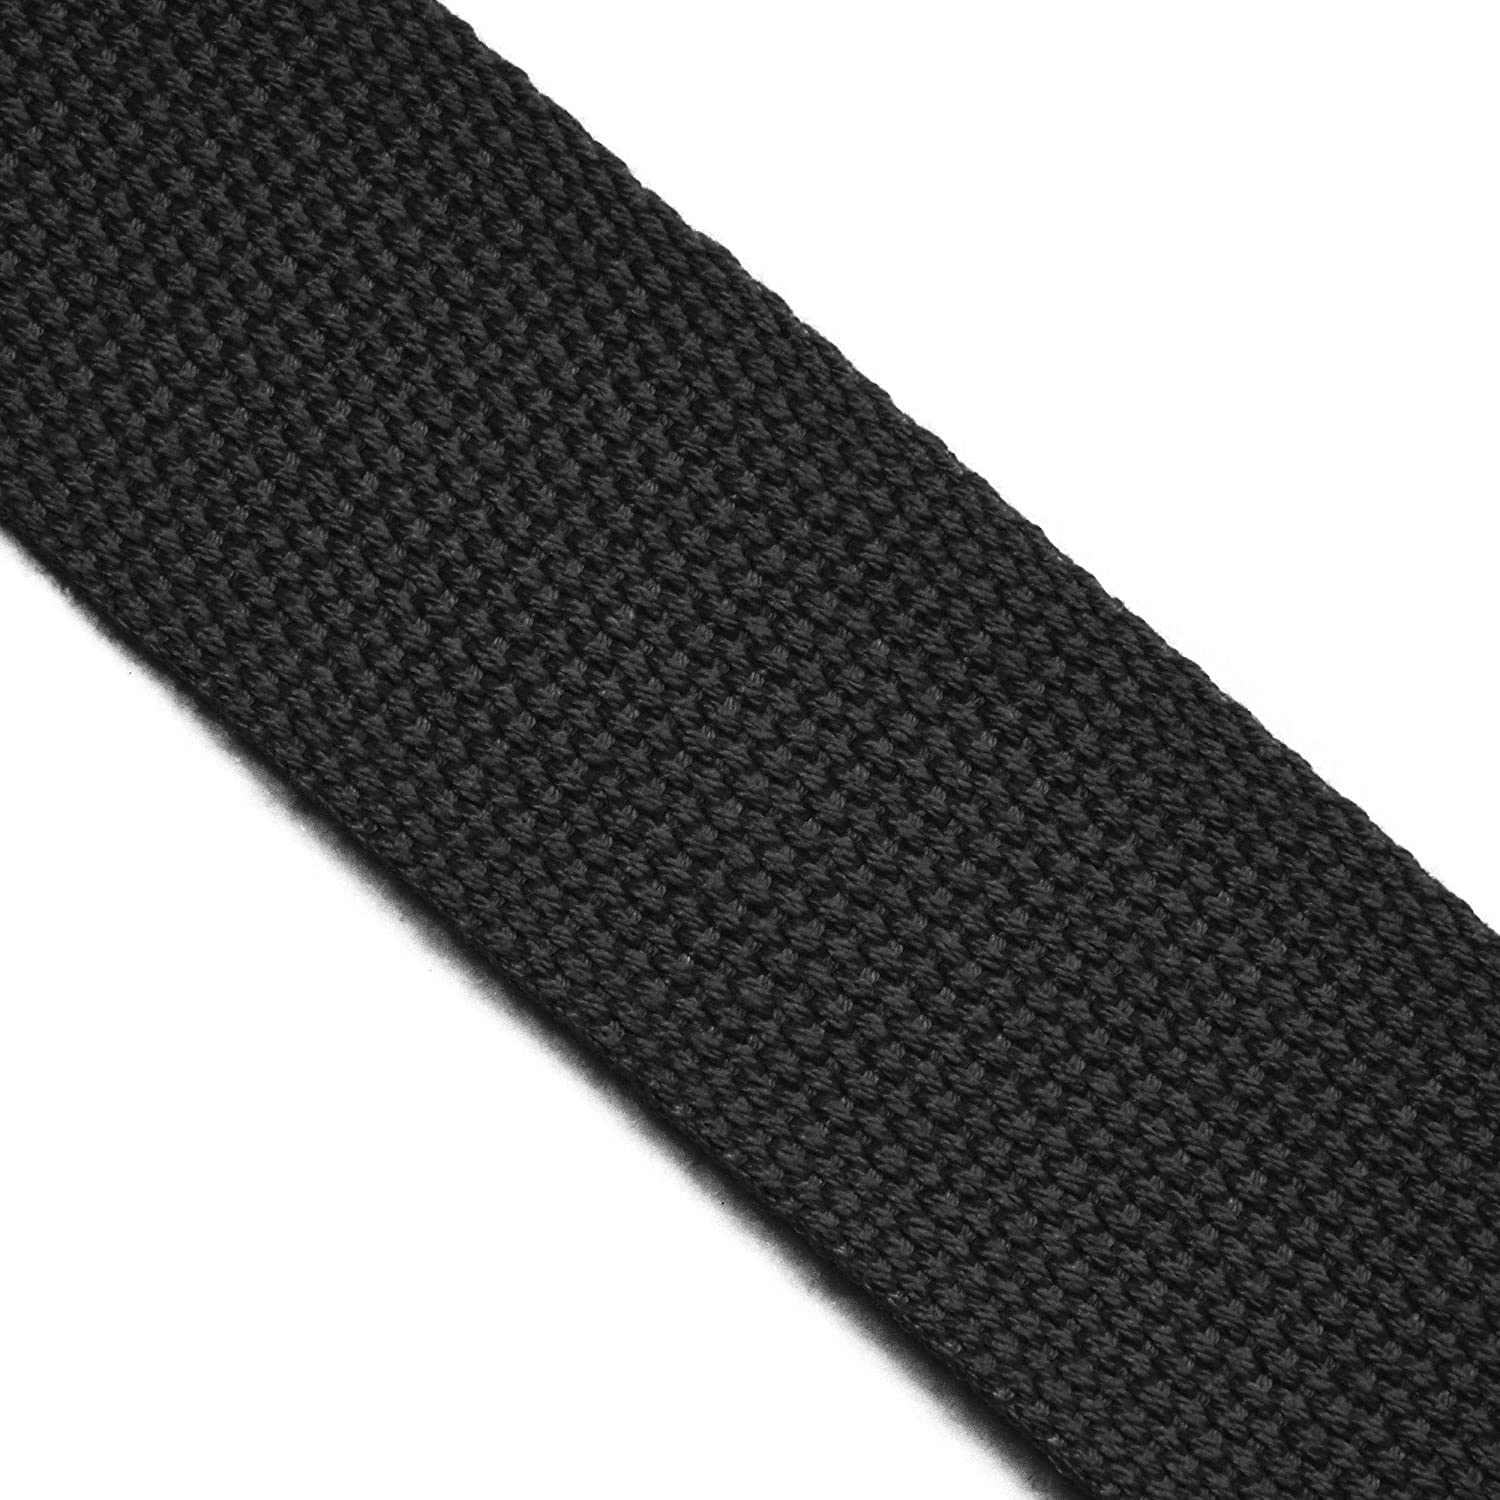 Cotton material of yoga mat carry strap